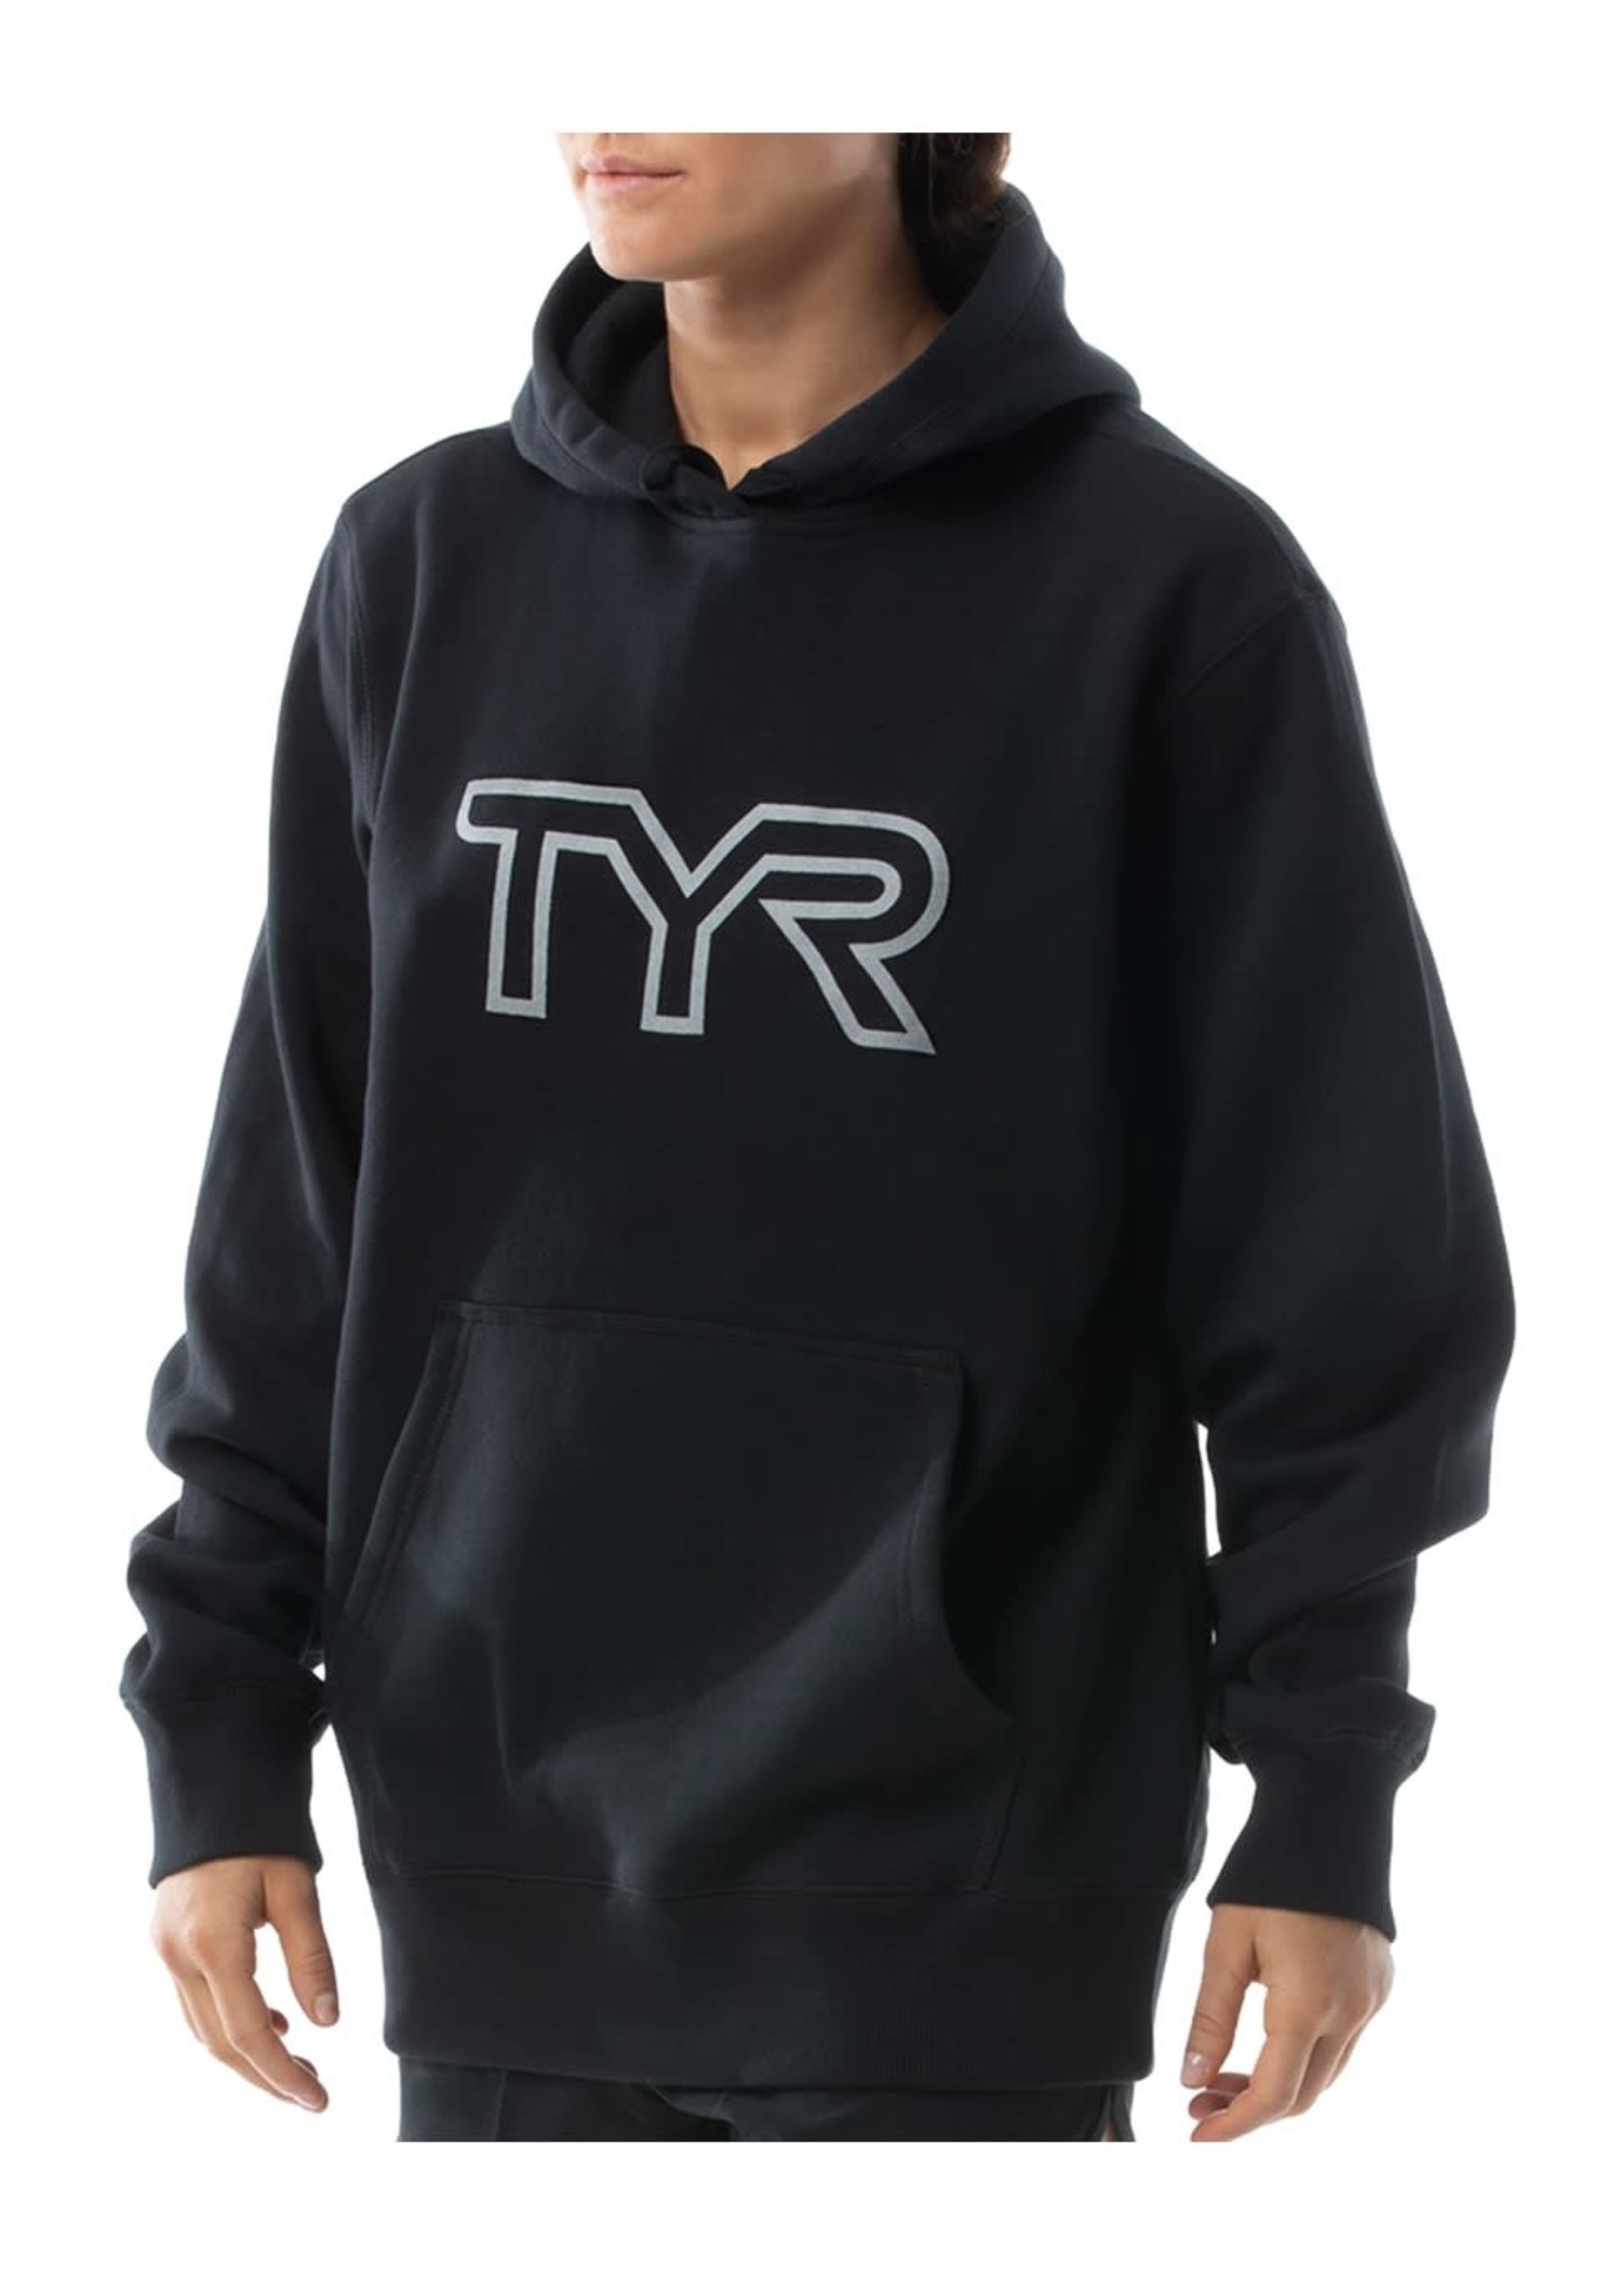 TYR UNISEX REFLECT PULLOVER